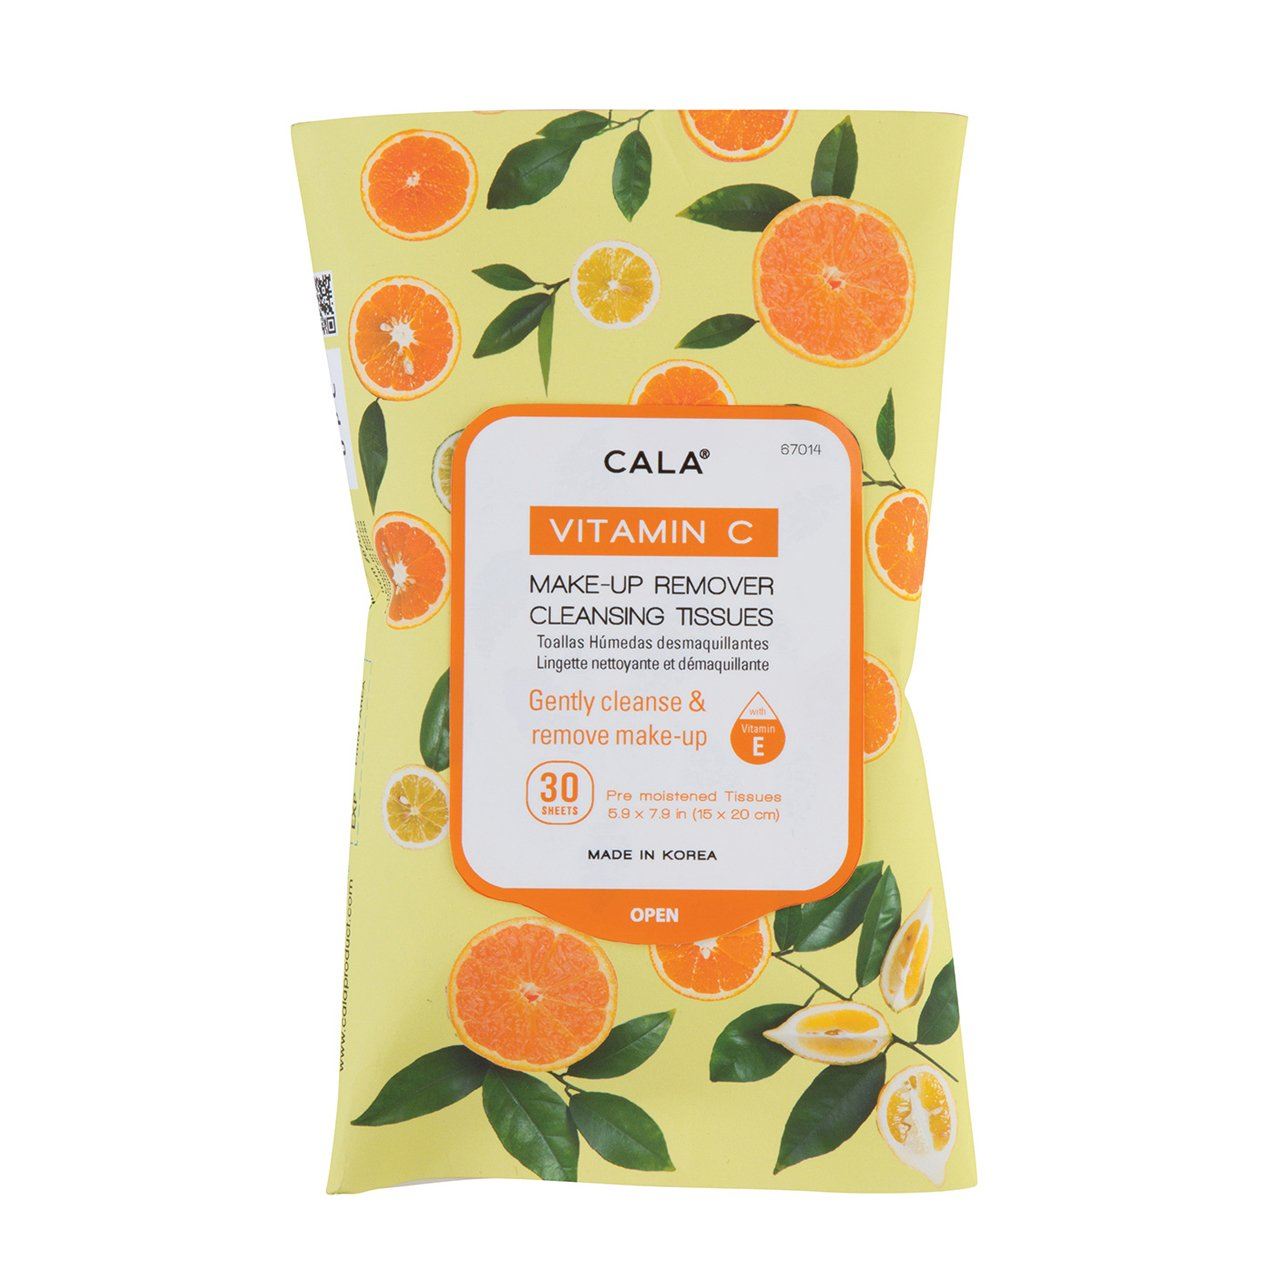 Cala Vitamin C Makeup Remover Cleansing Tissues #67014 (6PACK)